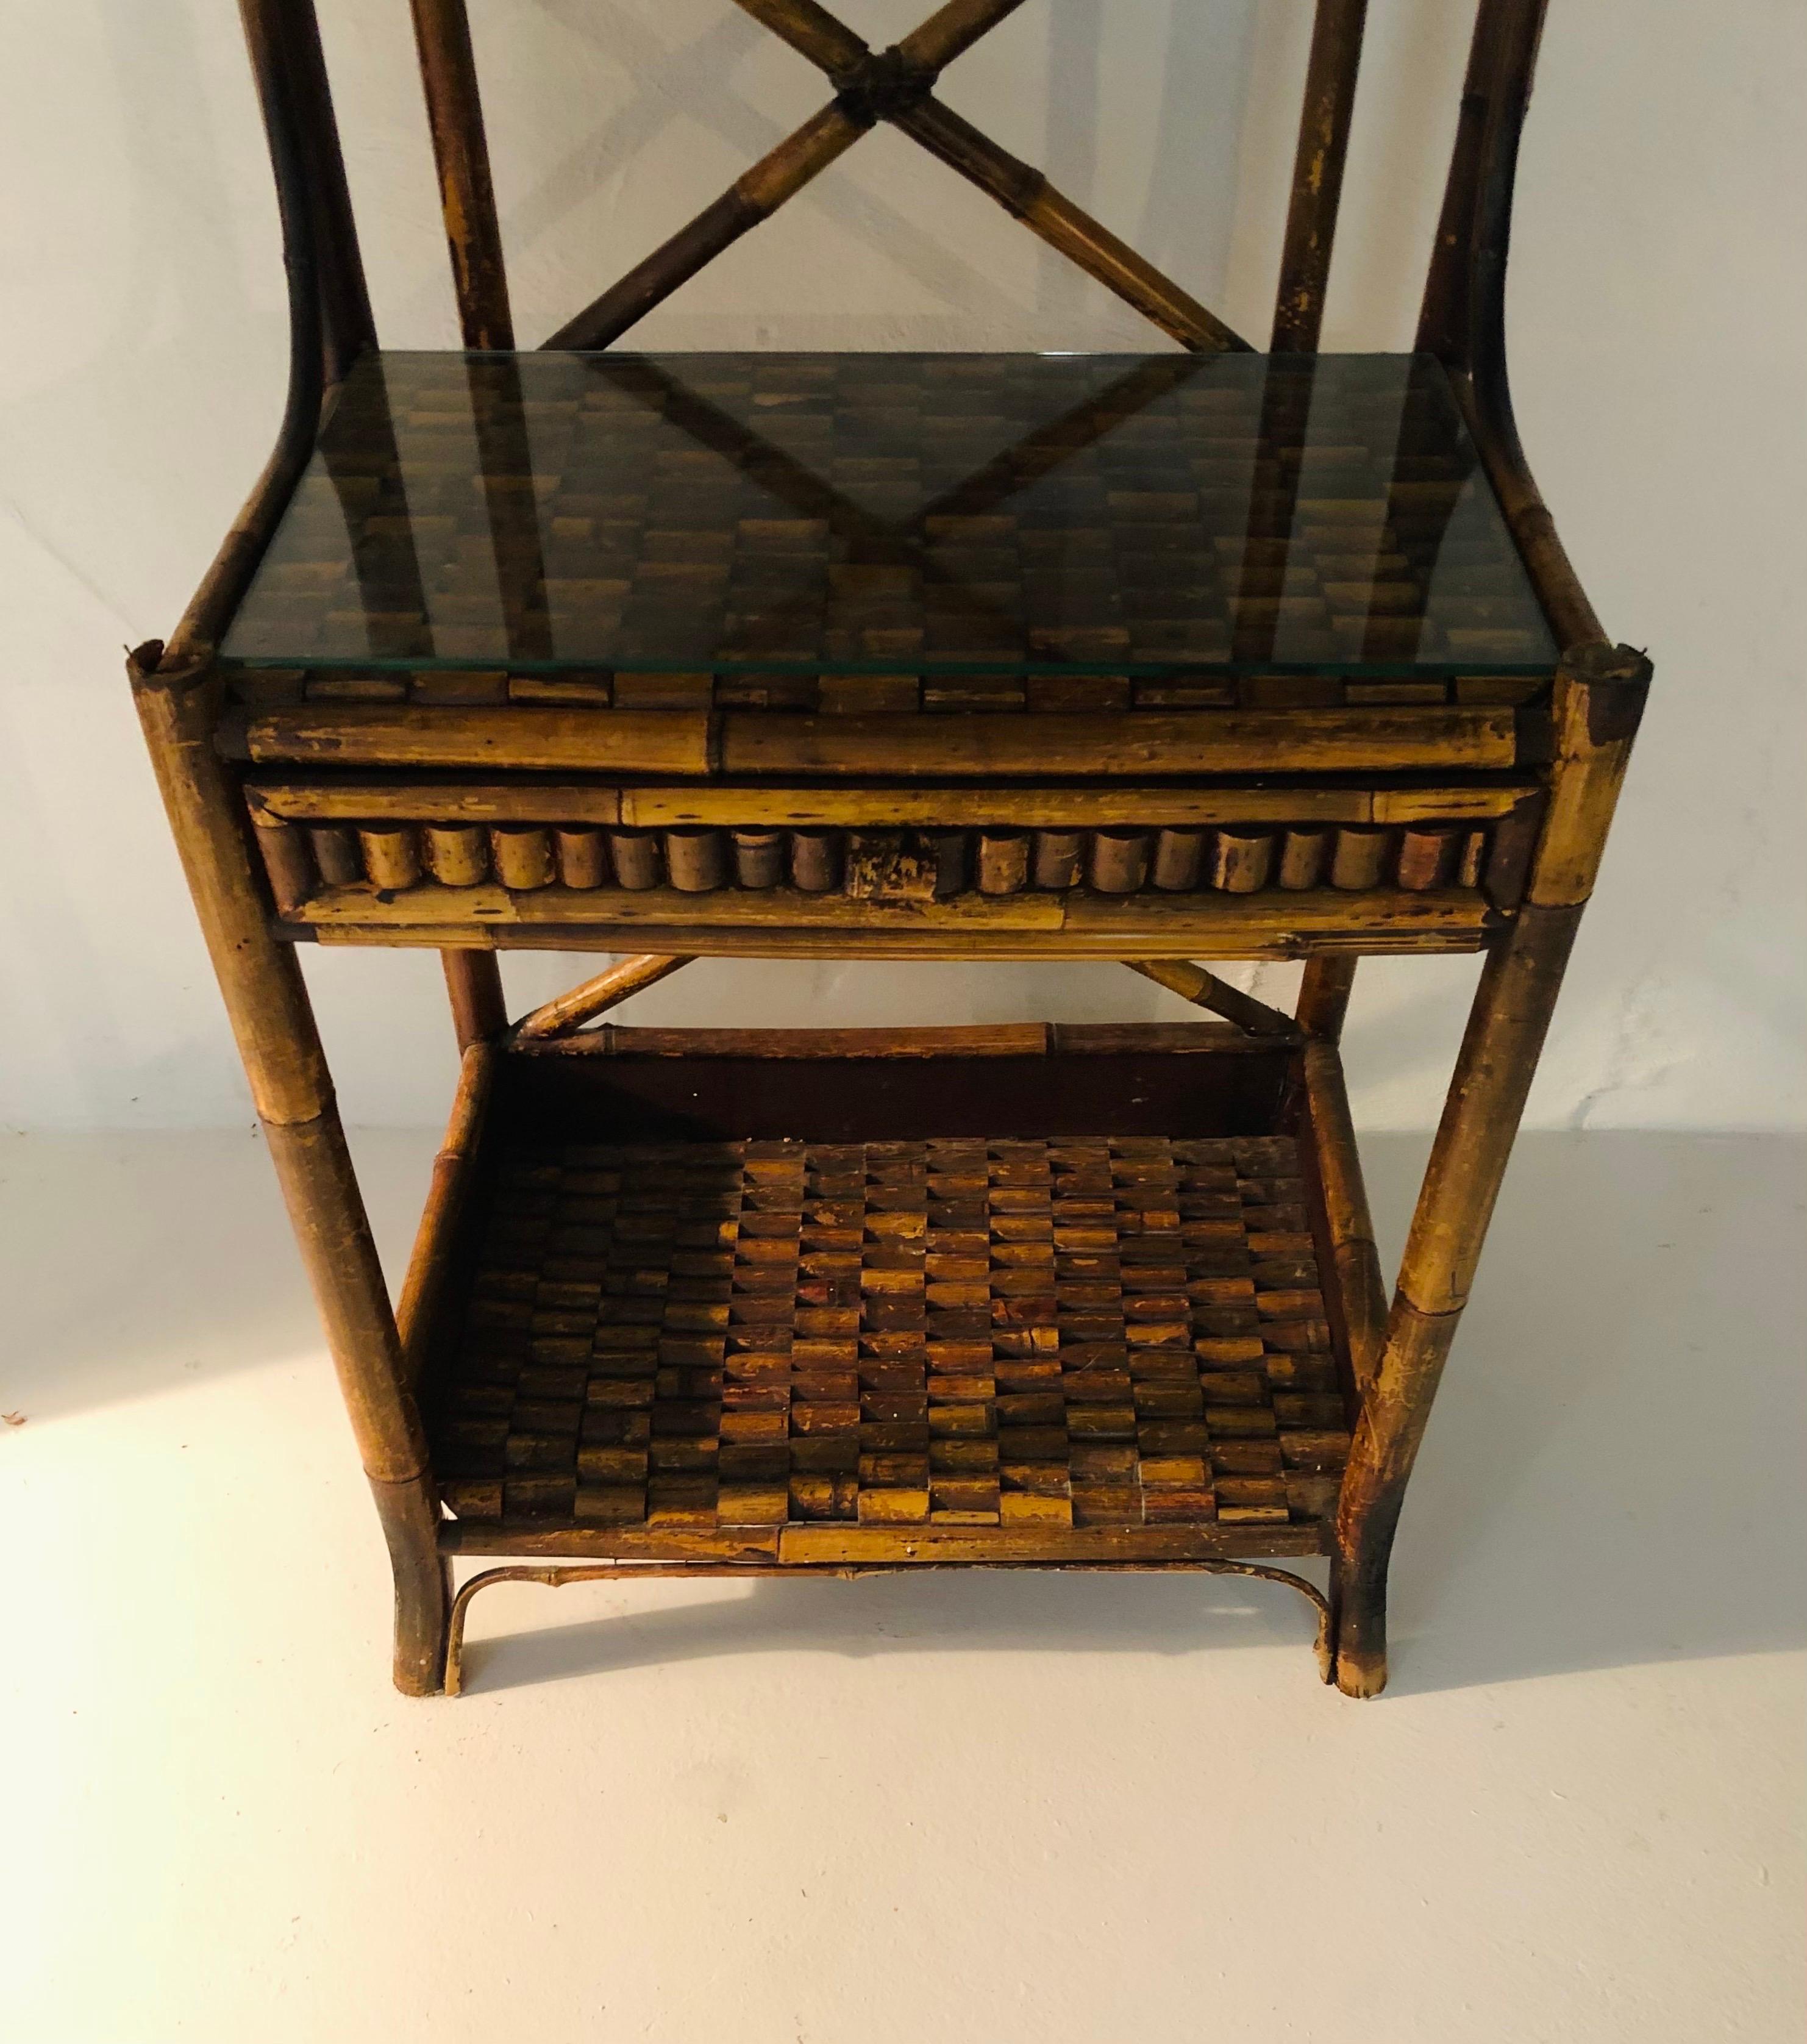 This is a wonderful antique burnt bamboo vanity dressing table, dating to around the turn of the century, While this beautiful piece is an antique, it can still function for actual use. The drawer glides in & out smoothly, and the piece is